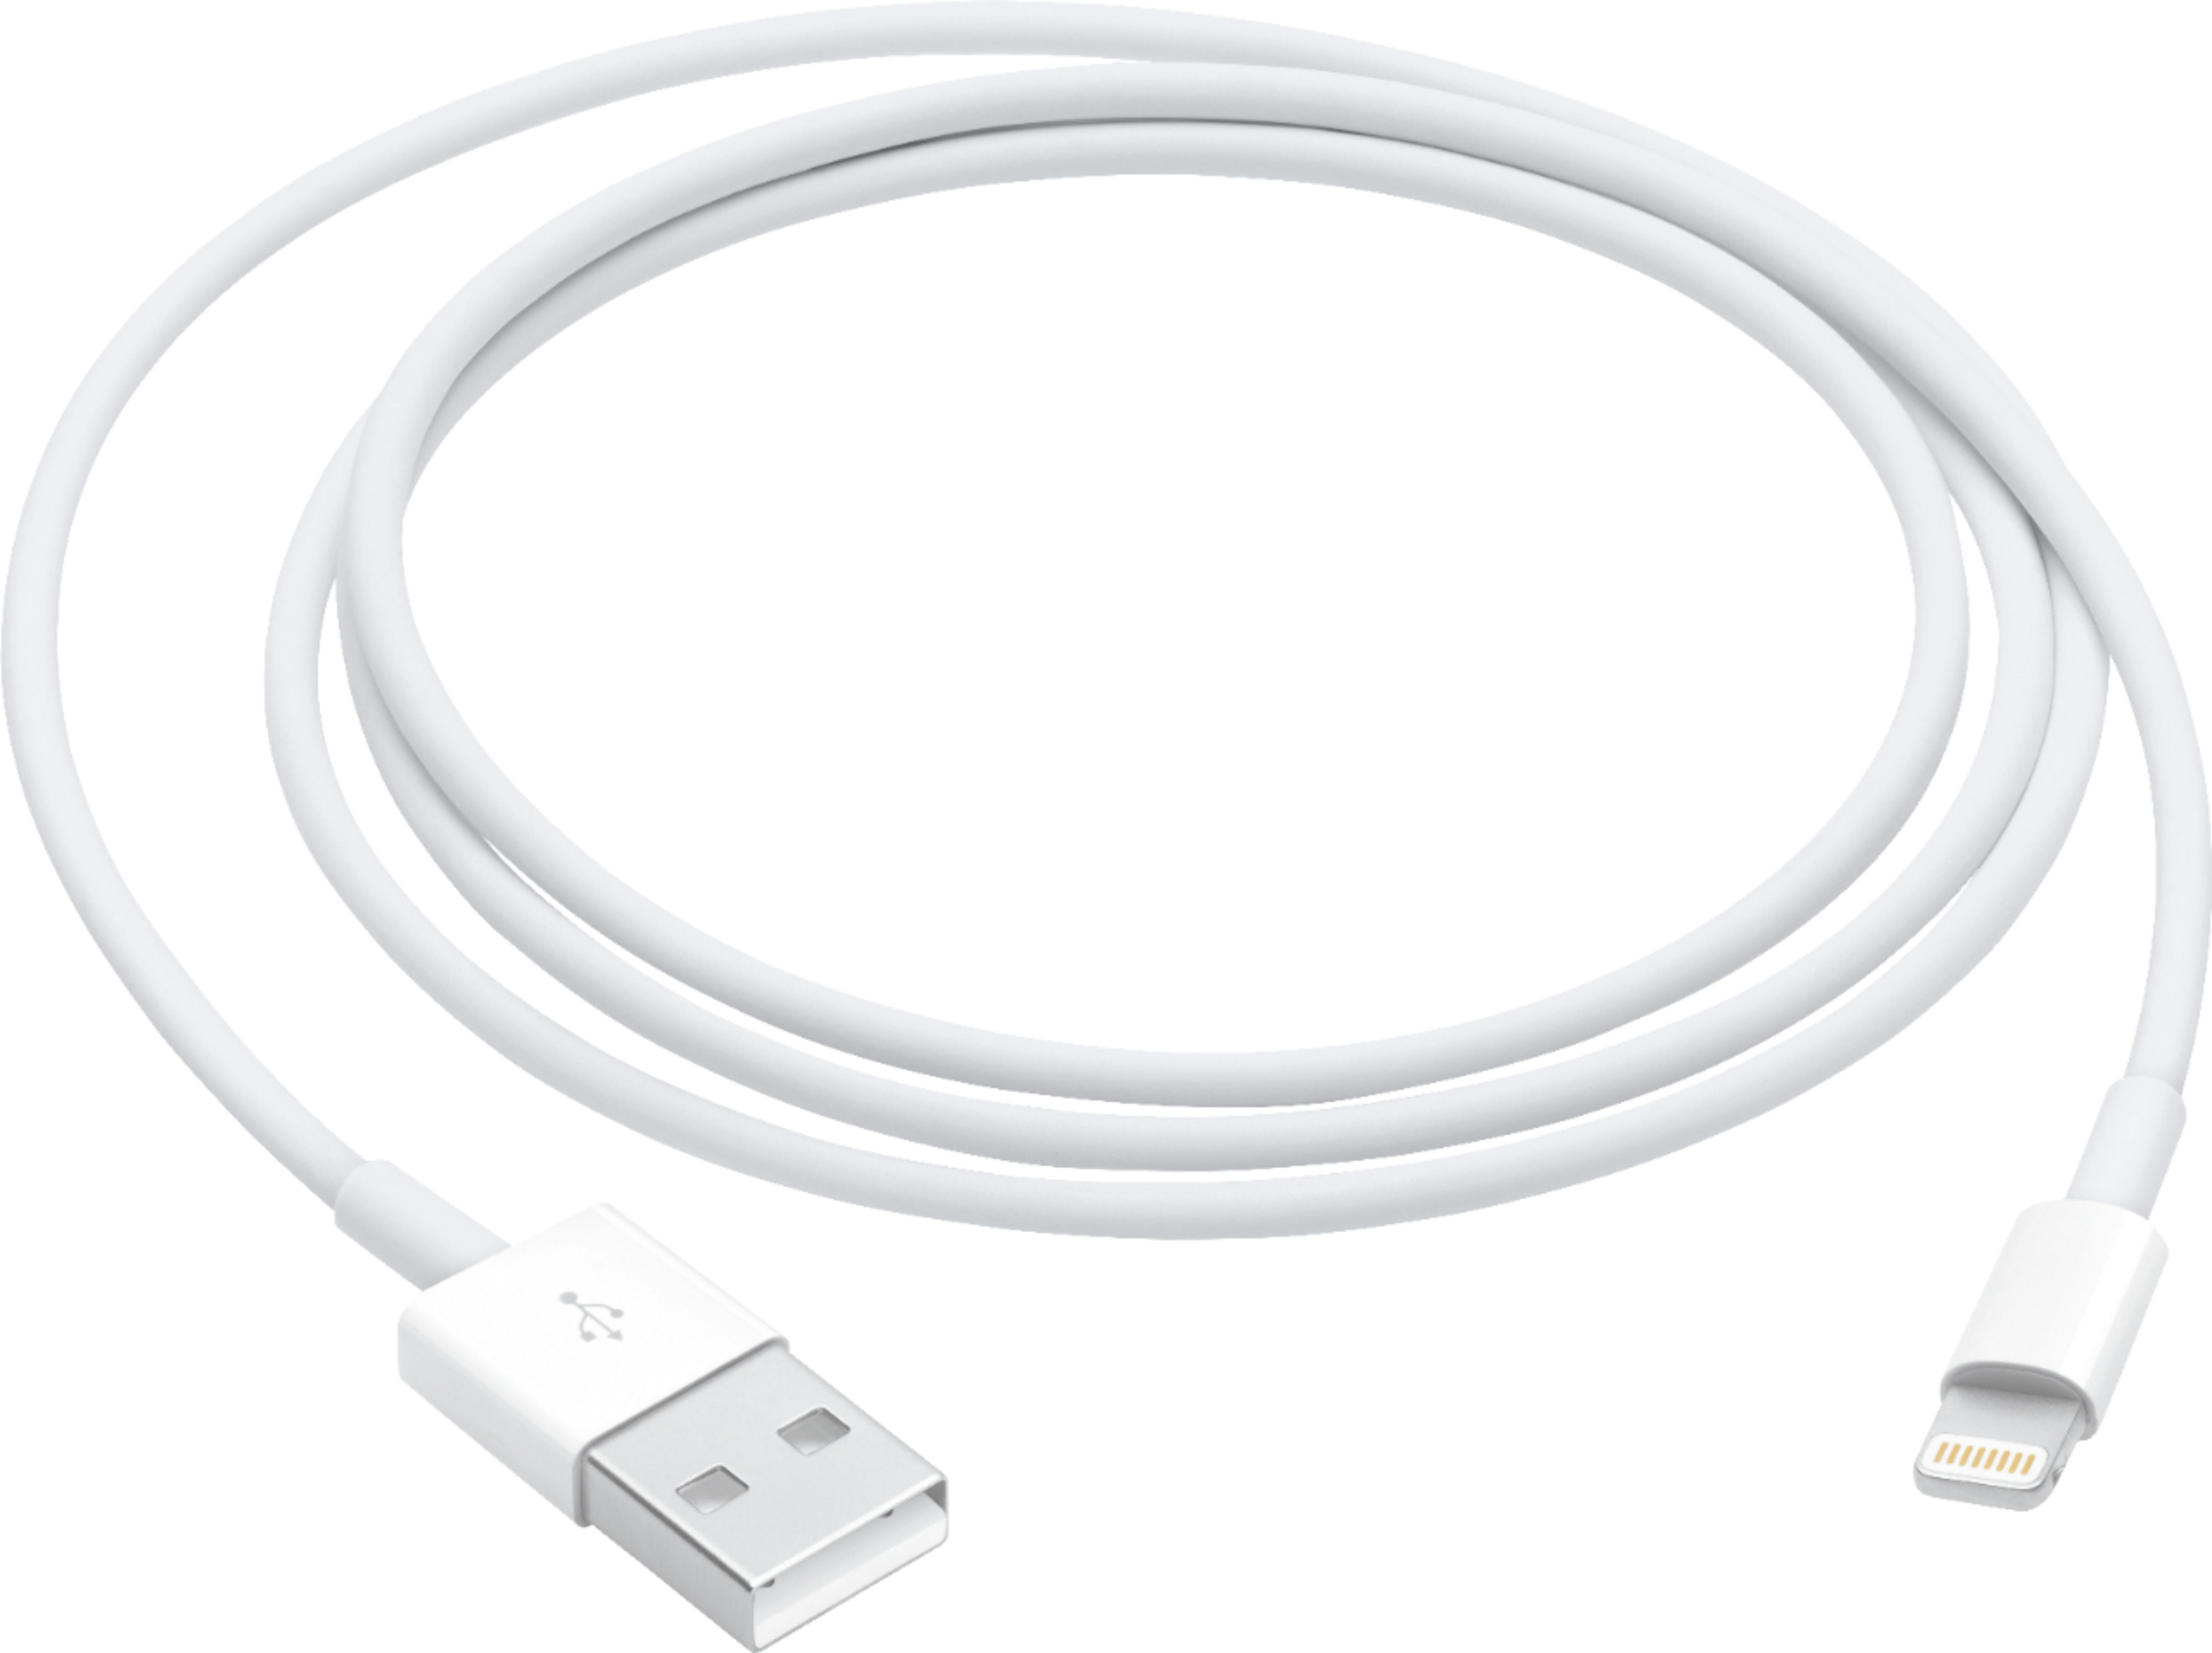 Arena cuchara motor Apple 3.3' USB Type A-to-Lightning Charging Cable White MXLY2AM/A - Best Buy